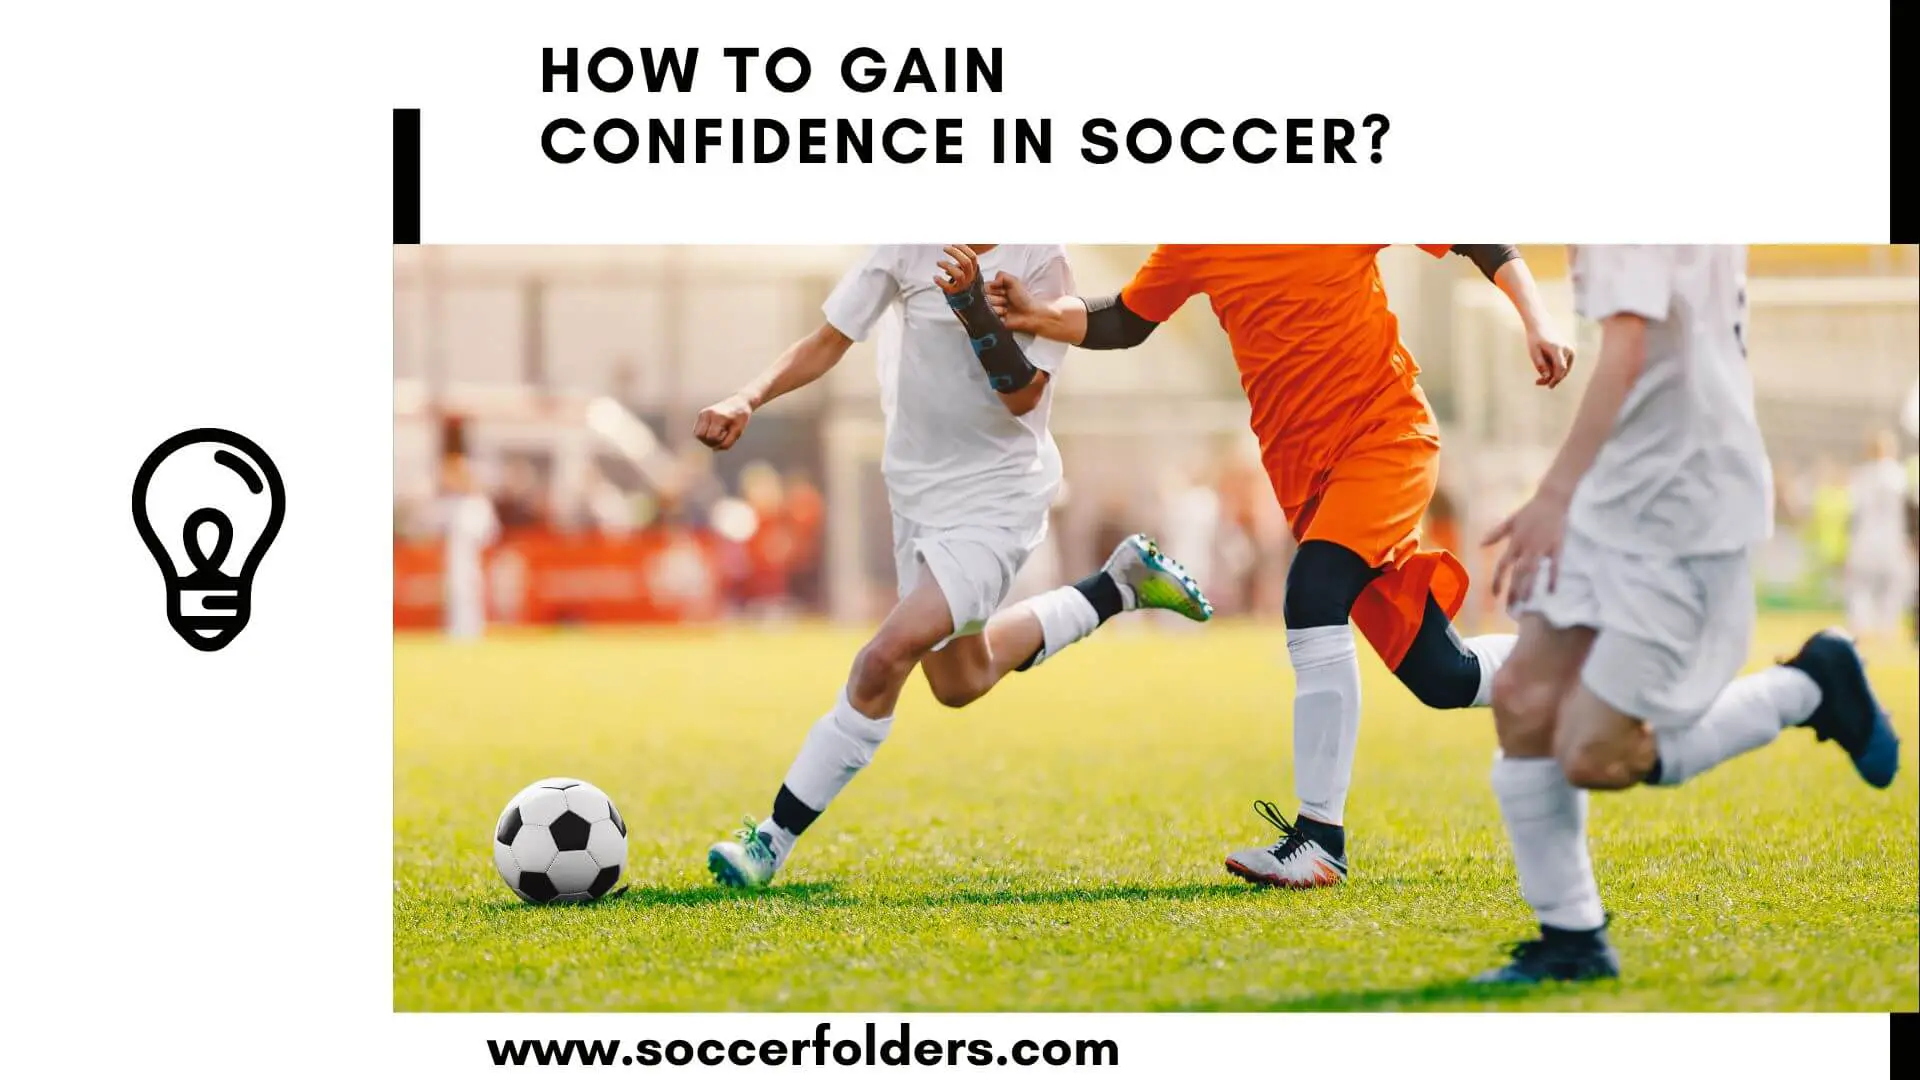 How to gain confidence in soccer - Featured Image